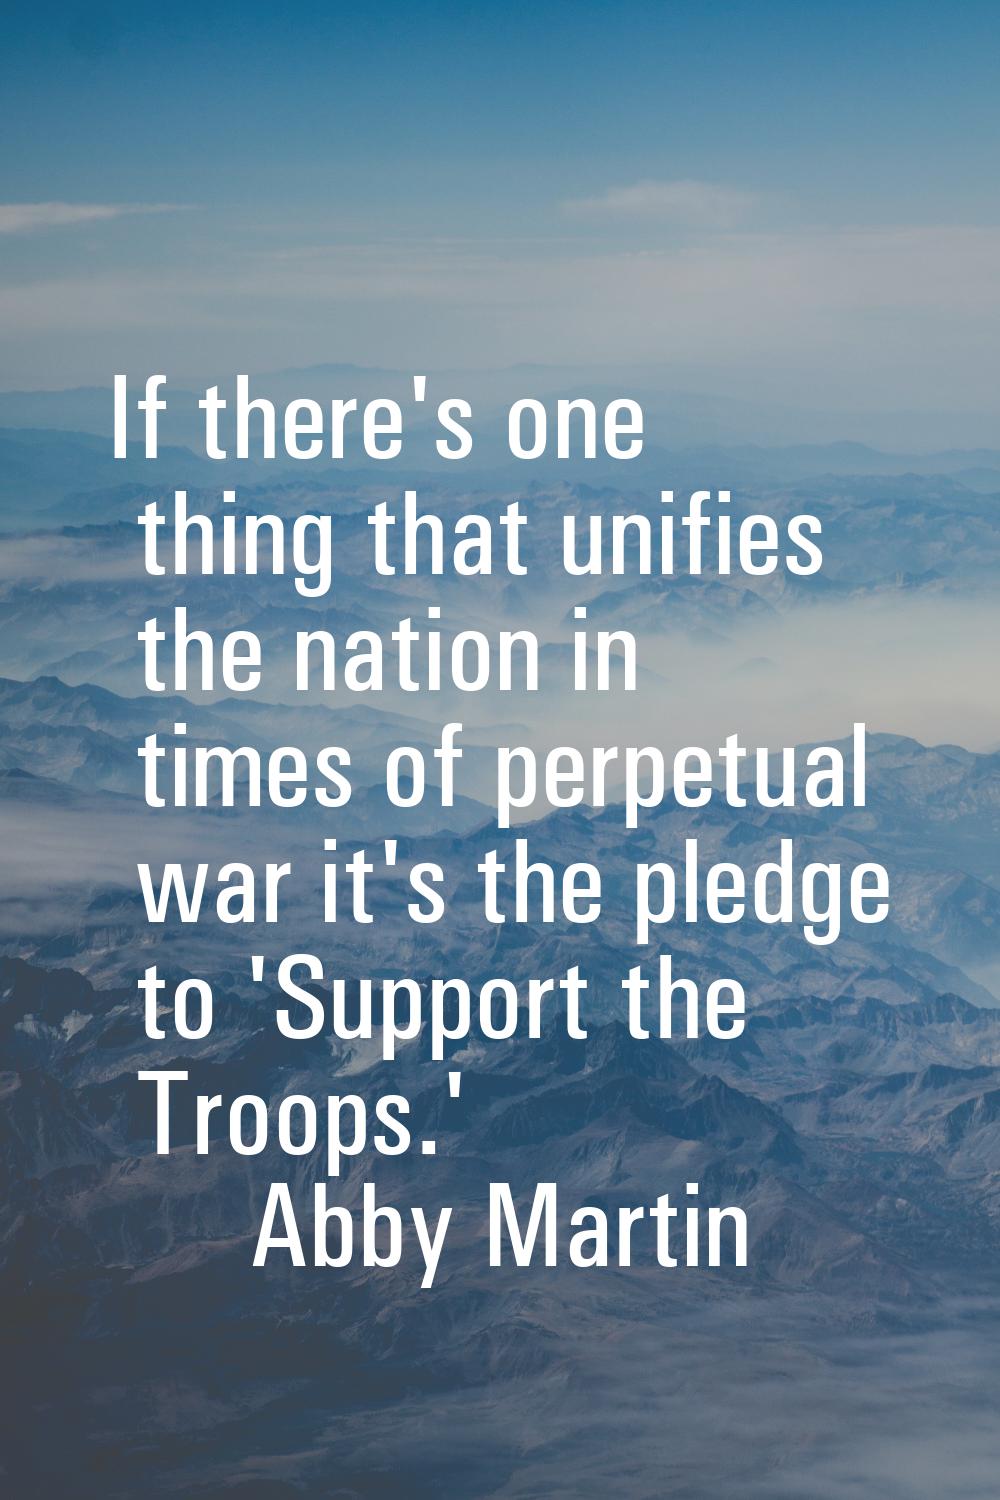 If there's one thing that unifies the nation in times of perpetual war it's the pledge to 'Support 